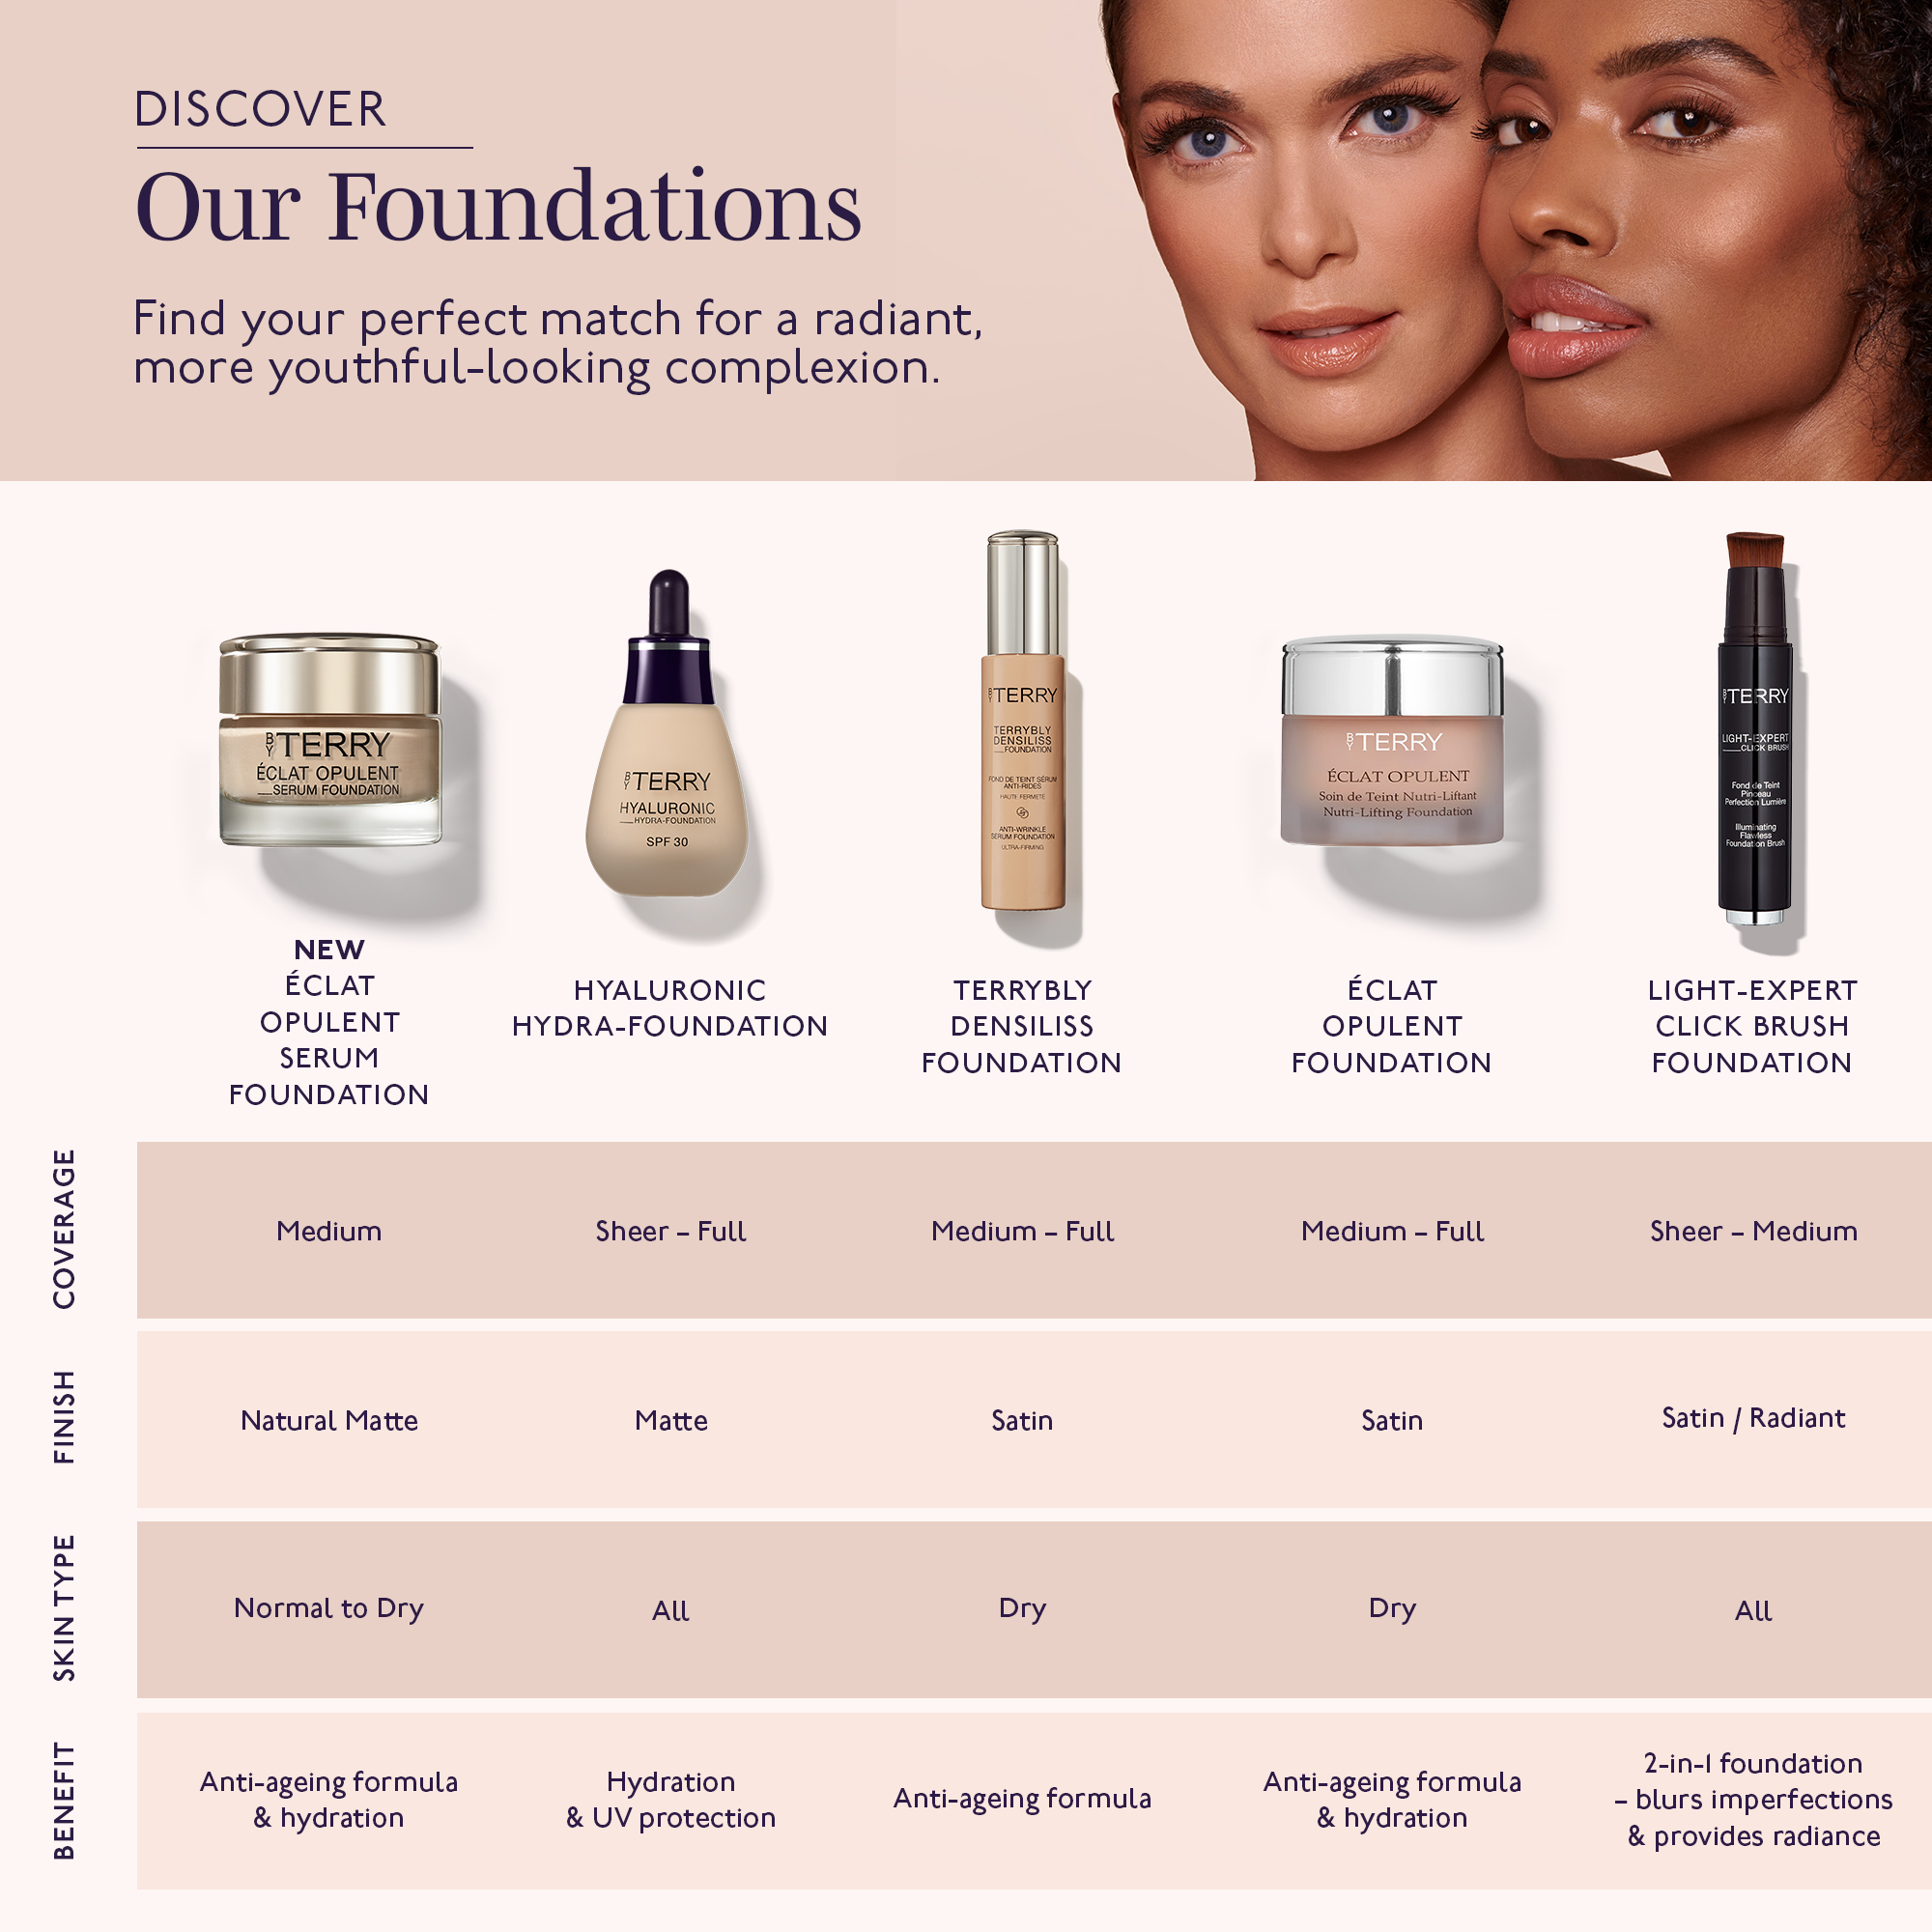 DISCOVER 
                                  Our Foundations Find your perfect match for a radiant, more youthful-Looking complexion. NEW ECLAT OPULENT SERUM FOUNDATION,HYALURONIC HYDRA-FOUNDATION, ÉCLAT OPLF soindeT6ra Nutri-Lifting Found.. 
                                  TERRYBLY DENSILISS FOUNDATION, ECLAT OPULENT FOUNDATION, LIGHT-EXPERT CLICK BRUSH FOUNDATION.

                                  Medium, Sheer - Full, Medium - Full, Medium - Full, Sheer - Medium, Natural Matte Matte Satin Satin Satin / Radiant, Normal to Dry, All, Dry.
                                  Anti-ageing formula & hydration 
                                  Hydration & UV protection 
                                  Anti-ageing formula 
                                  Anti-ageing formula & hydration 
                                  2-in-I foundation - blurs imperfections & provides radiance 